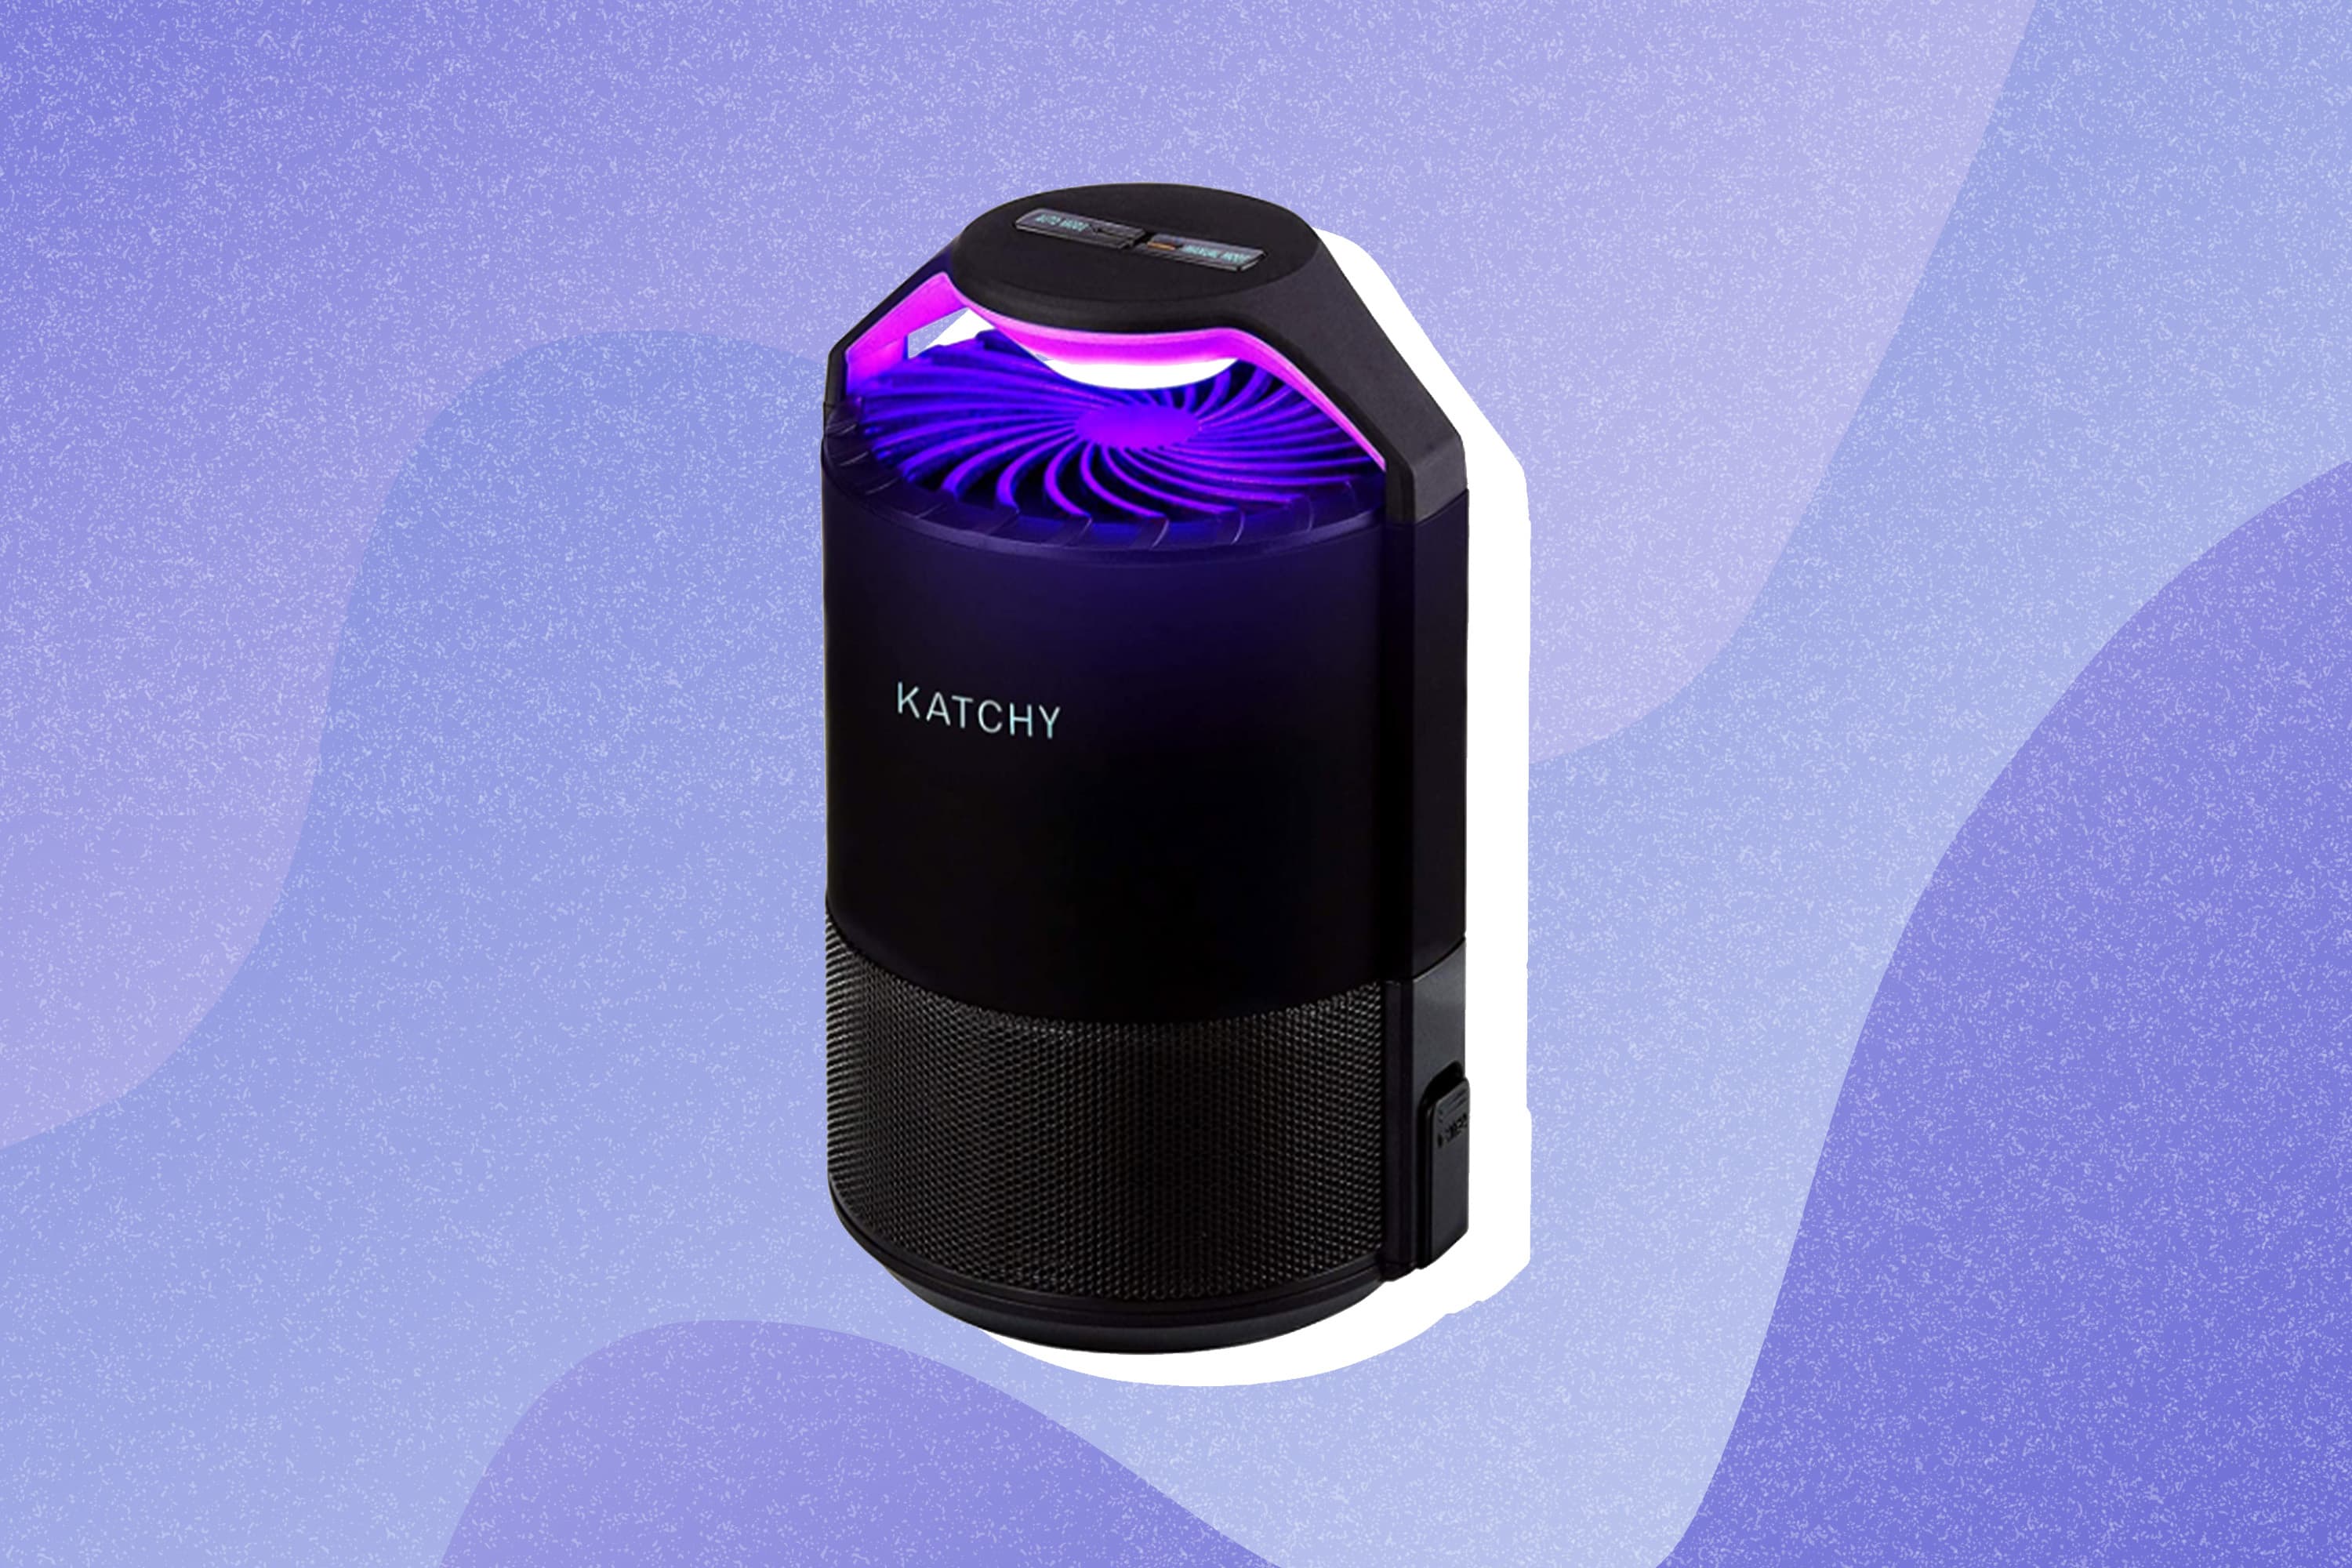 The Katchy indoor insect trap is on sale for 30% off